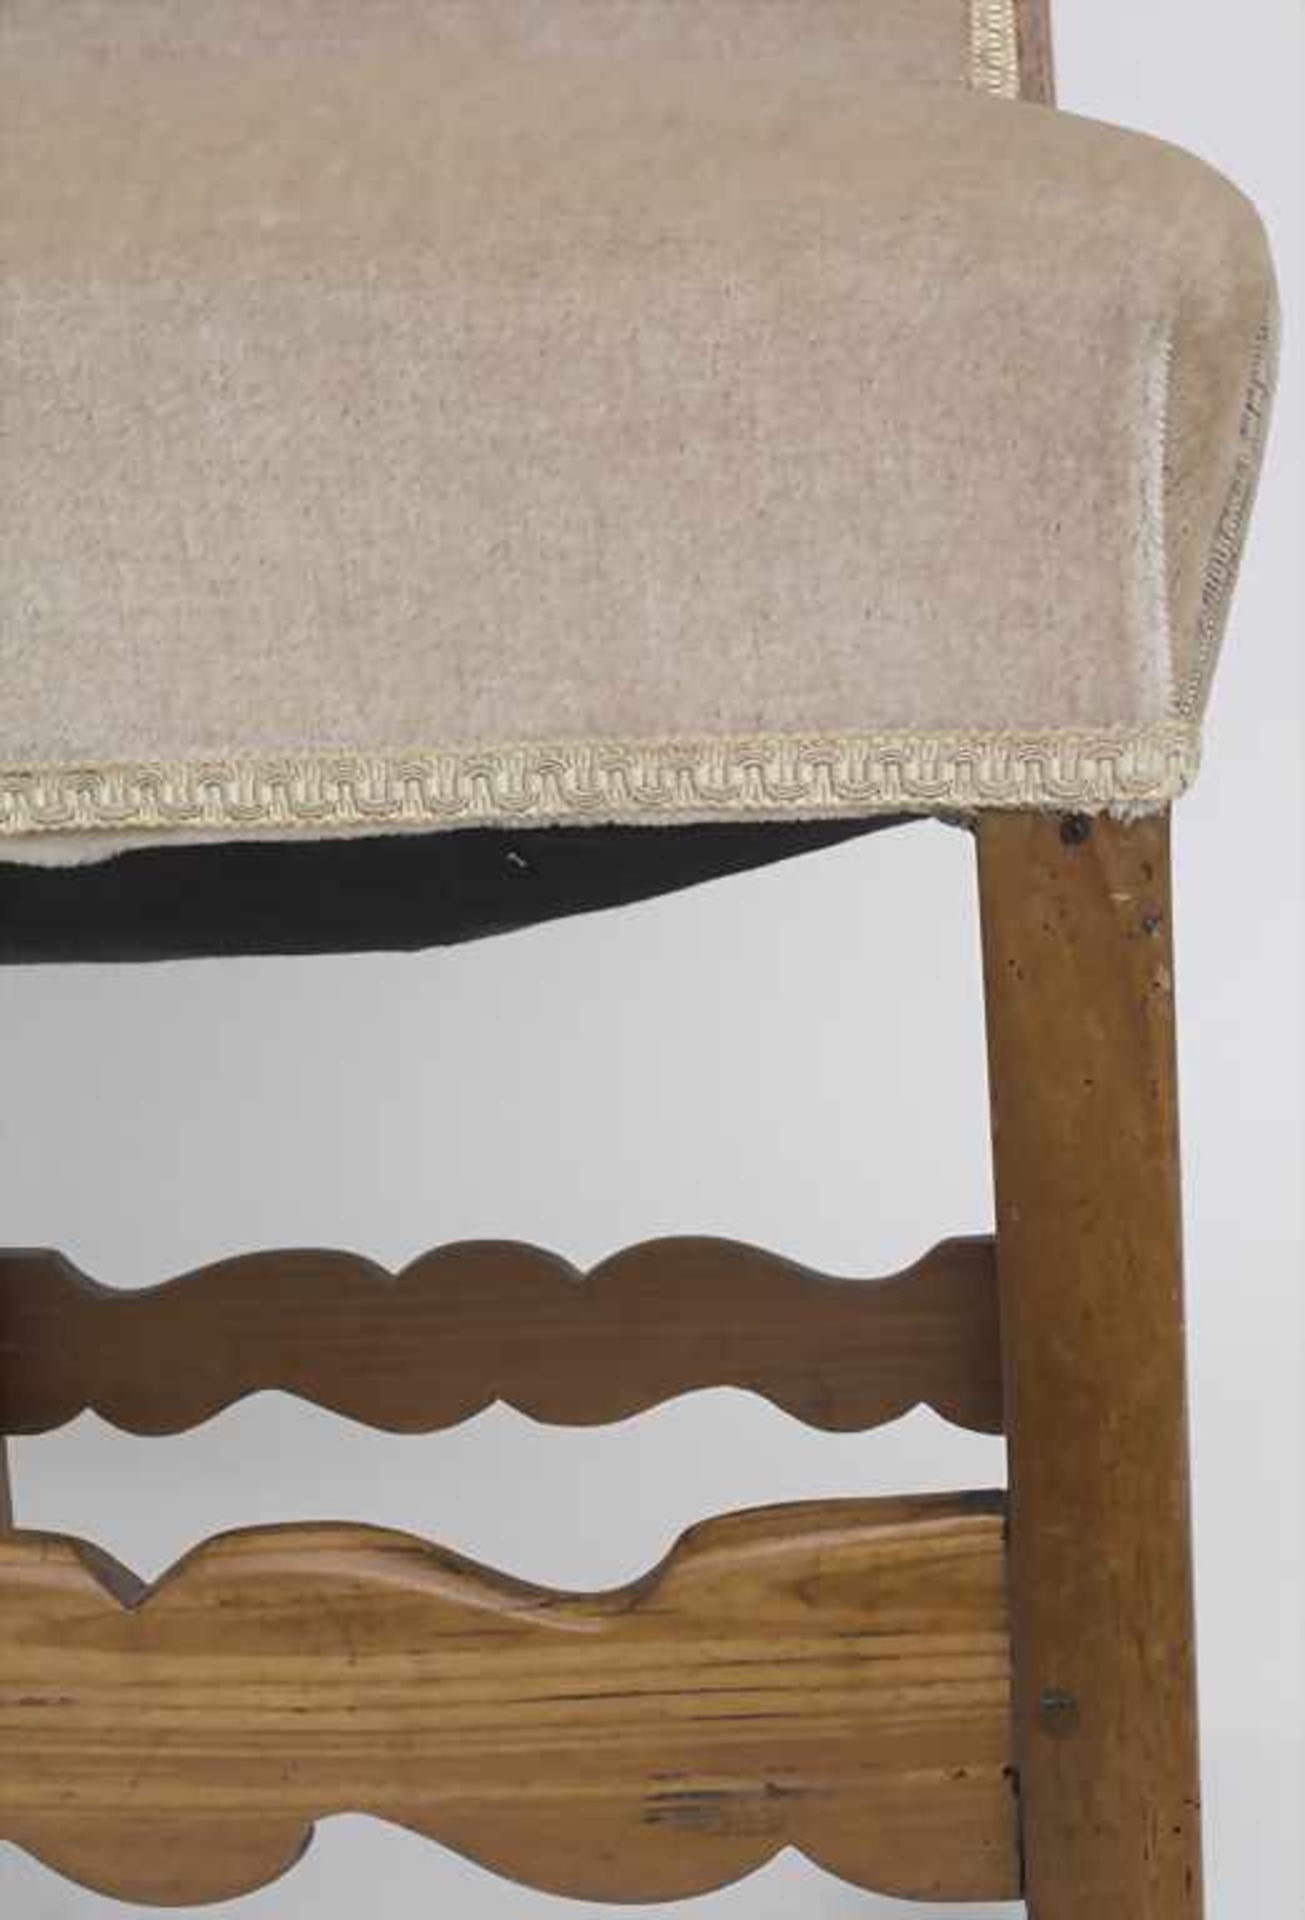 Stuhl mit Veloursbezug / A chair with velour coverMaterial: Holz, Sprungfederpolsterung, Maße: H. - Image 4 of 4